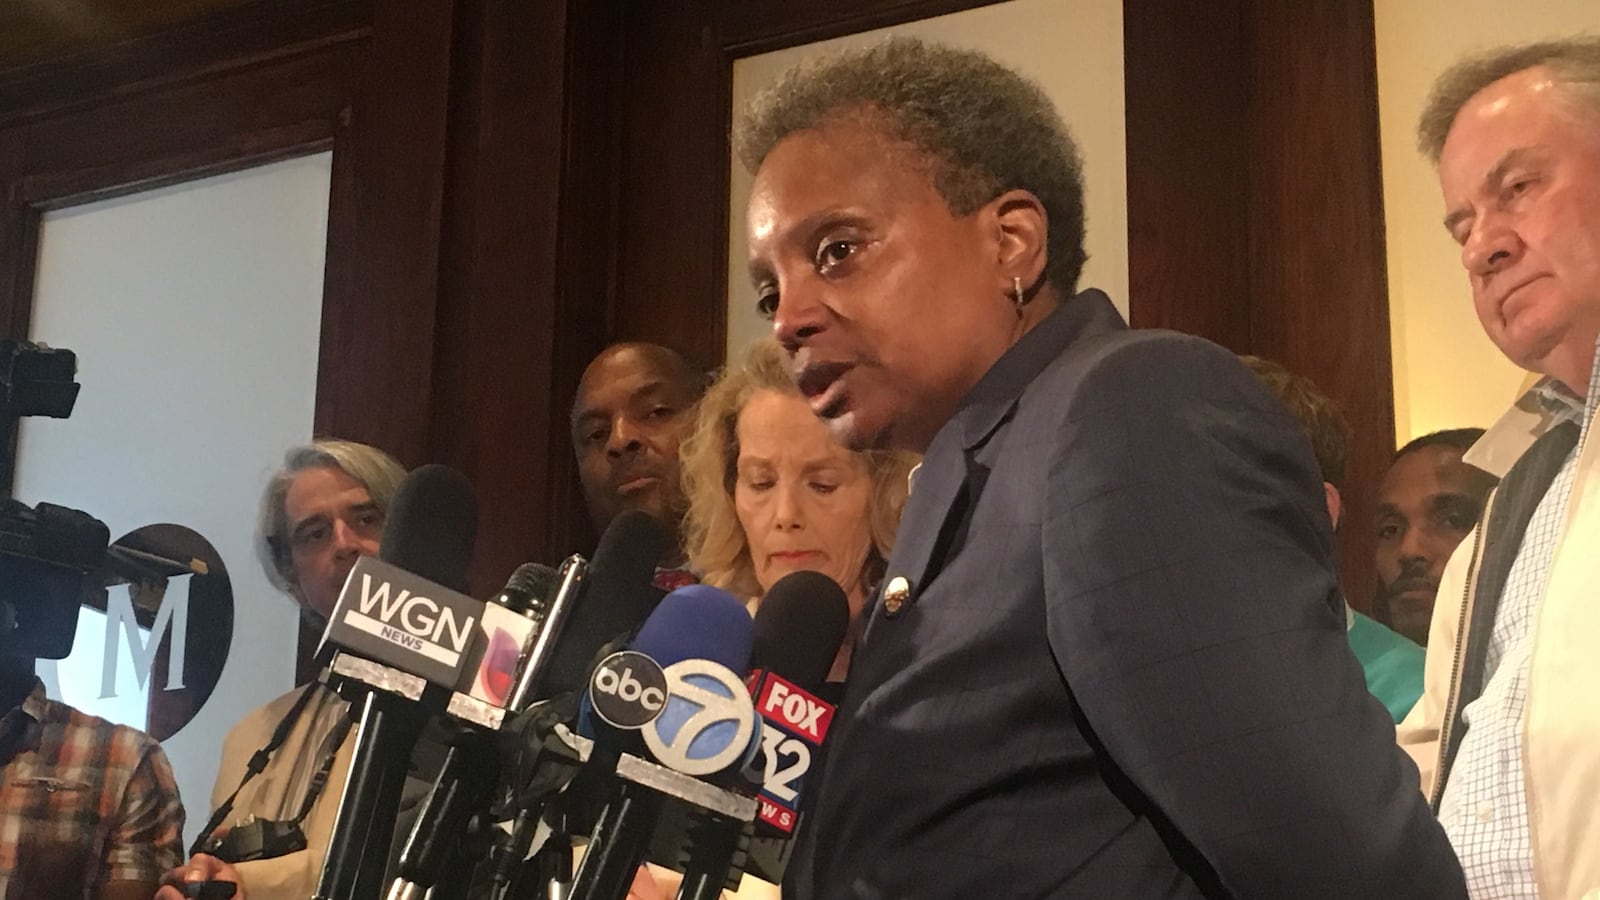 File photo of Chicago Mayor Lori Lightfoot speaking at Chicago’s City Club on May 28, 2019.